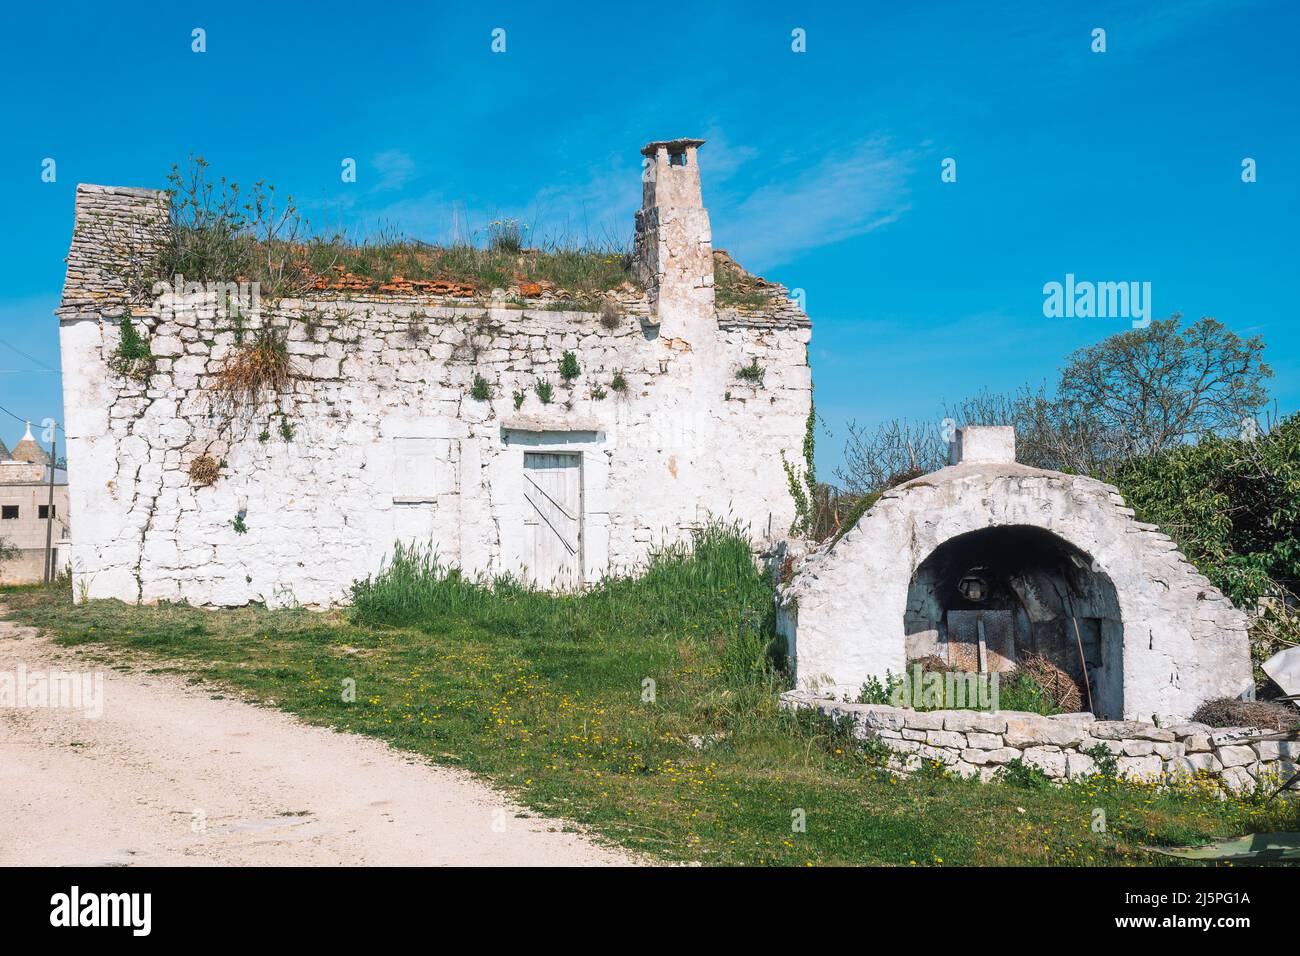 Beautiful white traditional old stone outdoor oven or fireplace in the countryside in Puglia region, Italy with dry stone wall and nature around Stock Photo